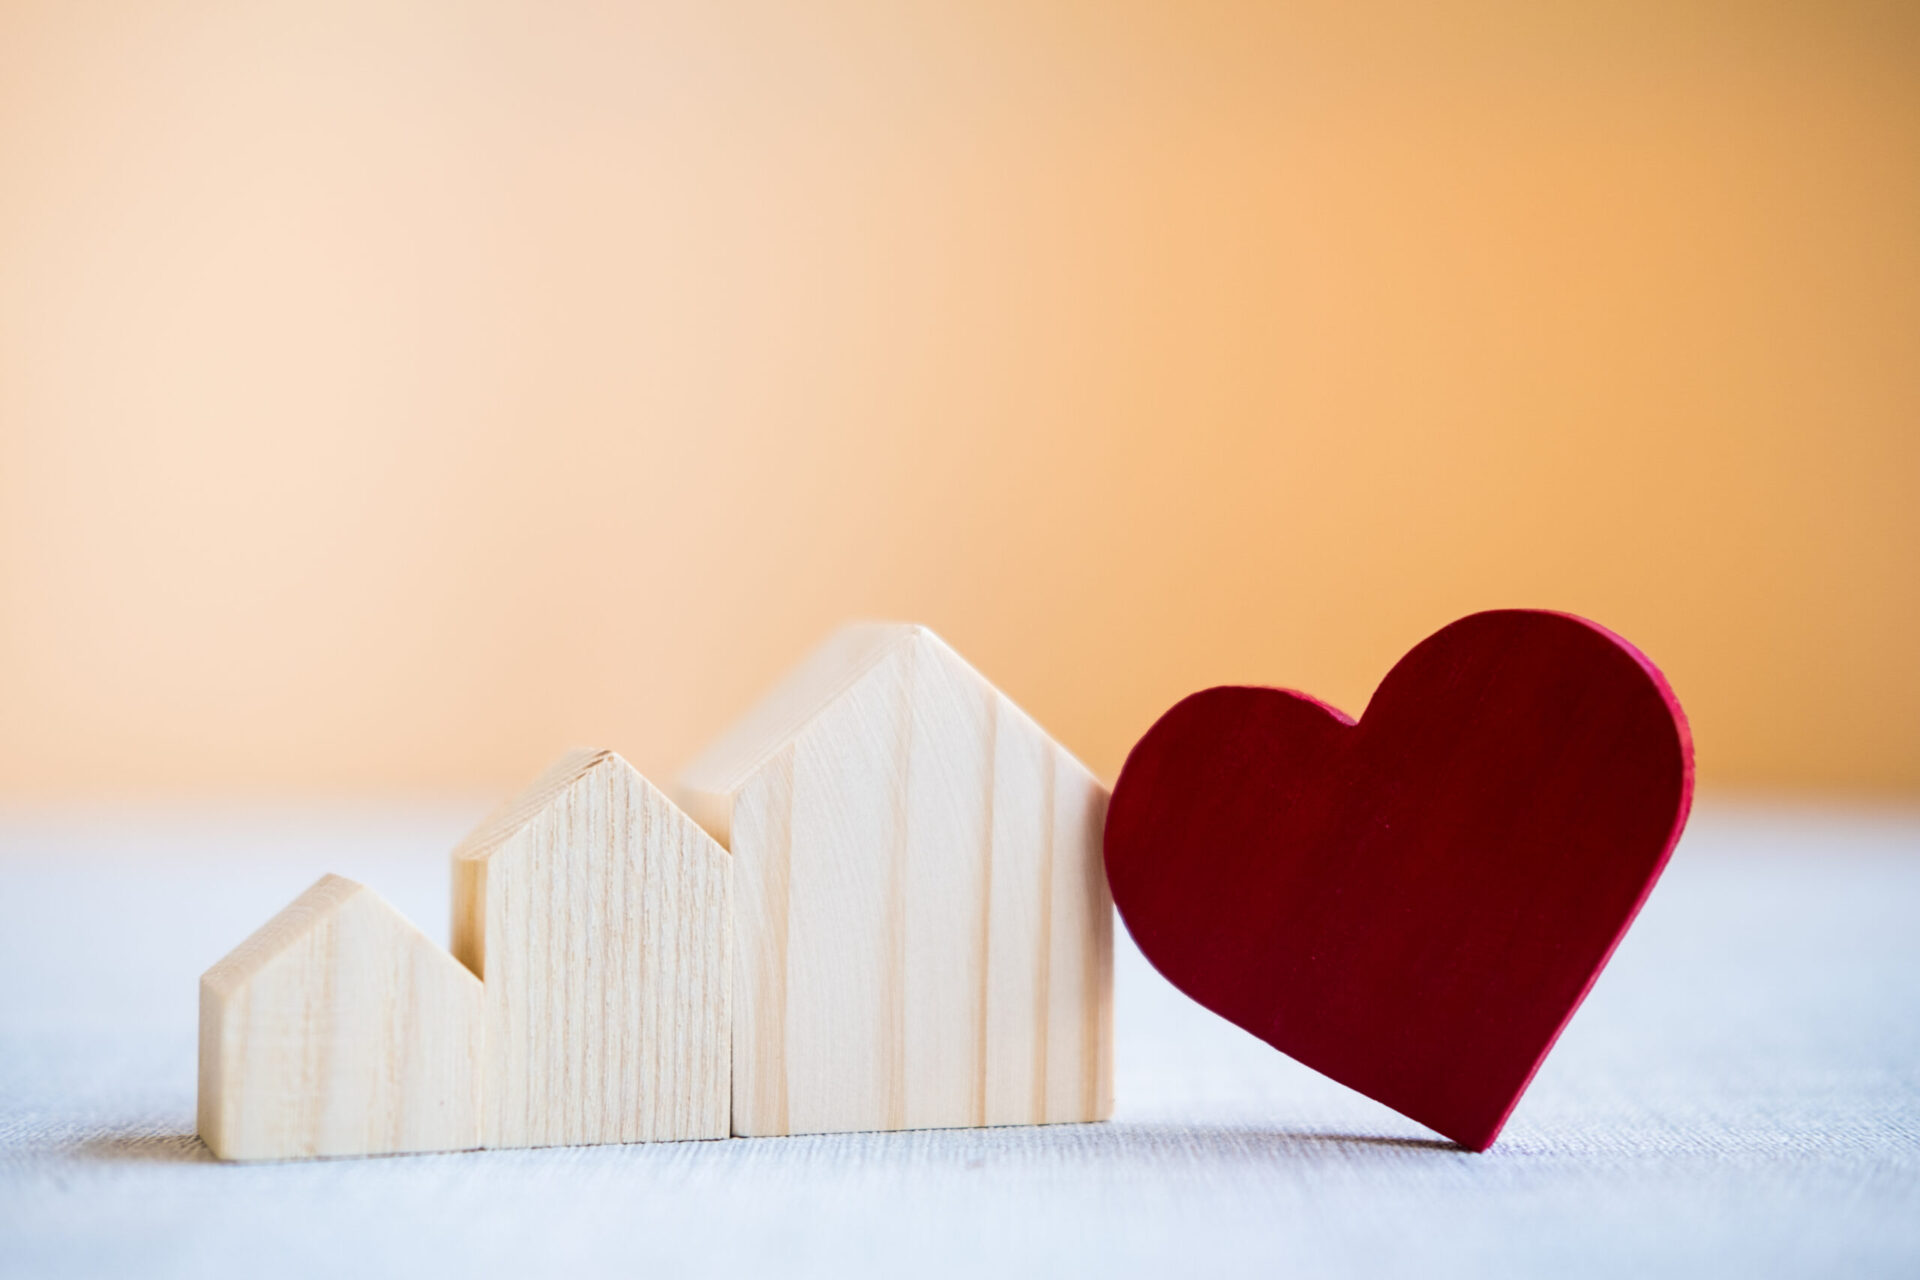 Morning Roundup (2/14/2022)– Falling In Love With Homes To Have Your Heart Broken?